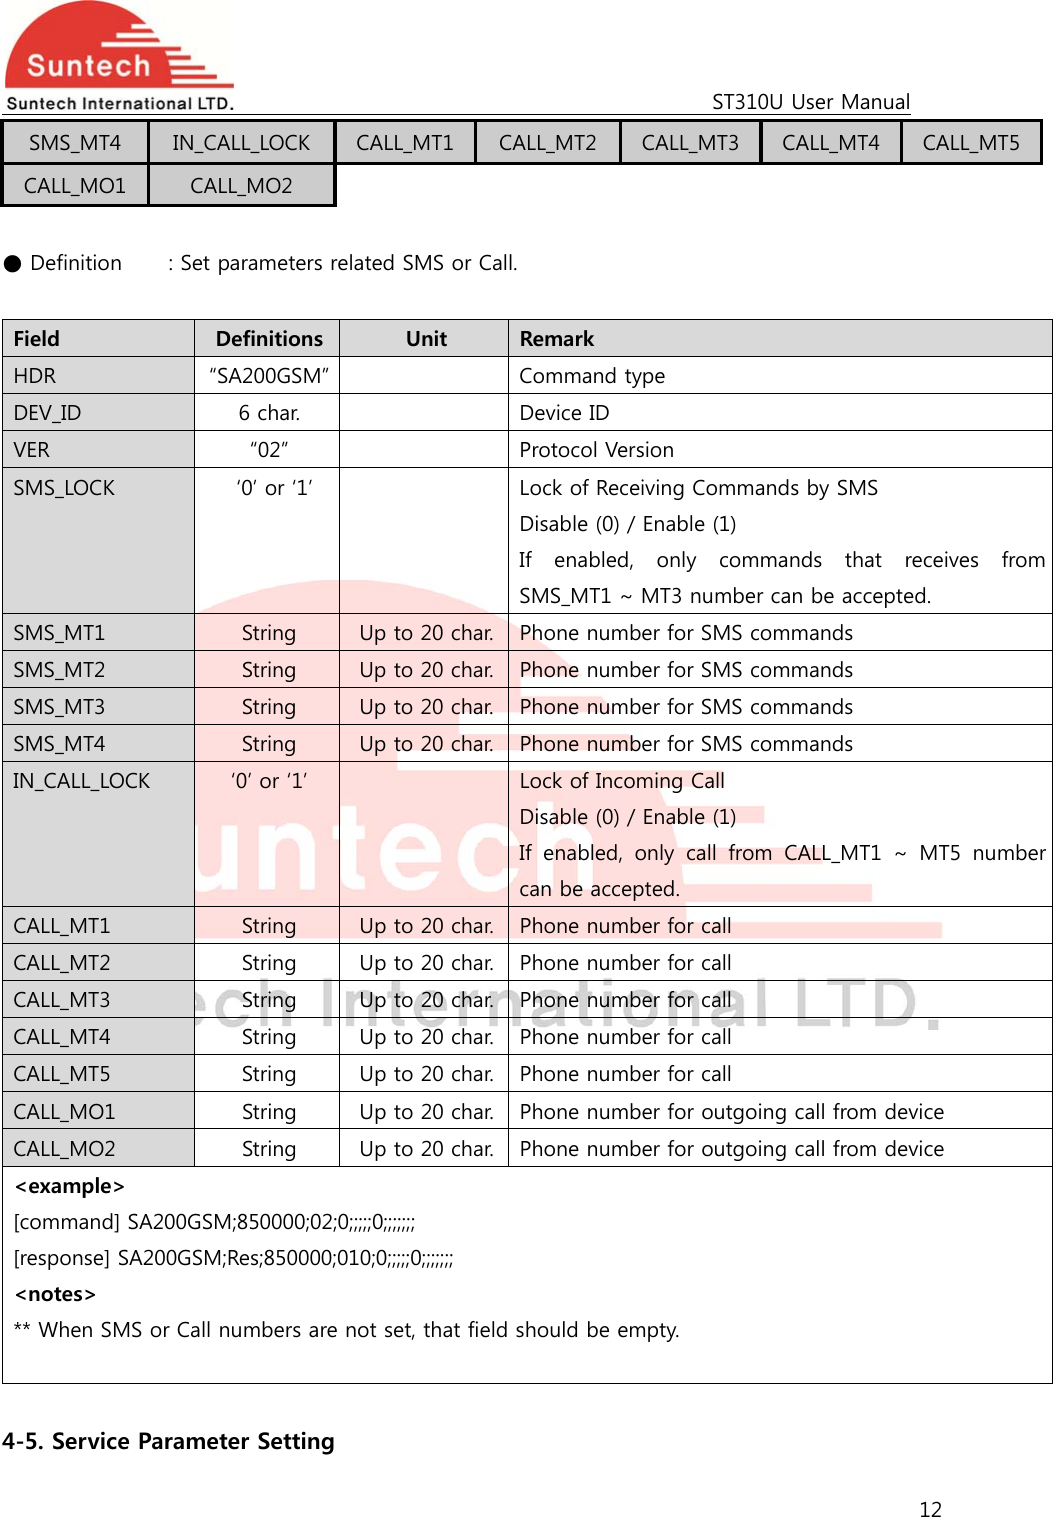                                                                                             ST310U User Manual 12  SMS_MT4  IN_CALL_LOCK  CALL_MT1  CALL_MT2  CALL_MT3  CALL_MT4  CALL_MT5 CALL_MO1  CALL_MO2  ● Definition    : Set parameters related SMS or Call.  Field  Definitions  Unit  Remark HDR  “SA200GSM”    Command type DEV_ID  6 char.    Device ID VER  “02”    Protocol Version SMS_LOCK    ‘0’ or ‘1’    Lock of Receiving Commands by SMS Disable (0) / Enable (1) If enabled, only commands that receives from SMS_MT1 ~ MT3 number can be accepted.  SMS_MT1  String  Up to 20 char. Phone number for SMS commands SMS_MT2  String  Up to 20 char. Phone number for SMS commands SMS_MT3  String  Up to 20 char. Phone number for SMS commands SMS_MT4  String  Up to 20 char. Phone number for SMS commands IN_CALL_LOCK  ‘0’ or ‘1’    Lock of Incoming Call Disable (0) / Enable (1) If  enabled,  only  call  from  CALL_MT1  ~  MT5  number can be accepted. CALL_MT1  String  Up to 20 char. Phone number for call CALL_MT2  String  Up to 20 char. Phone number for call CALL_MT3  String  Up to 20 char. Phone number for call CALL_MT4  String  Up to 20 char. Phone number for call CALL_MT5  String  Up to 20 char. Phone number for call CALL_MO1  String  Up to 20 char. Phone number for outgoing call from device CALL_MO2  String  Up to 20 char. Phone number for outgoing call from device &lt;example&gt; [command] SA200GSM;850000;02;0;;;;;0;;;;;;; [response] SA200GSM;Res;850000;010;0;;;;;0;;;;;;; &lt;notes&gt; ** When SMS or Call numbers are not set, that field should be empty.   4-5. Service Parameter Setting 